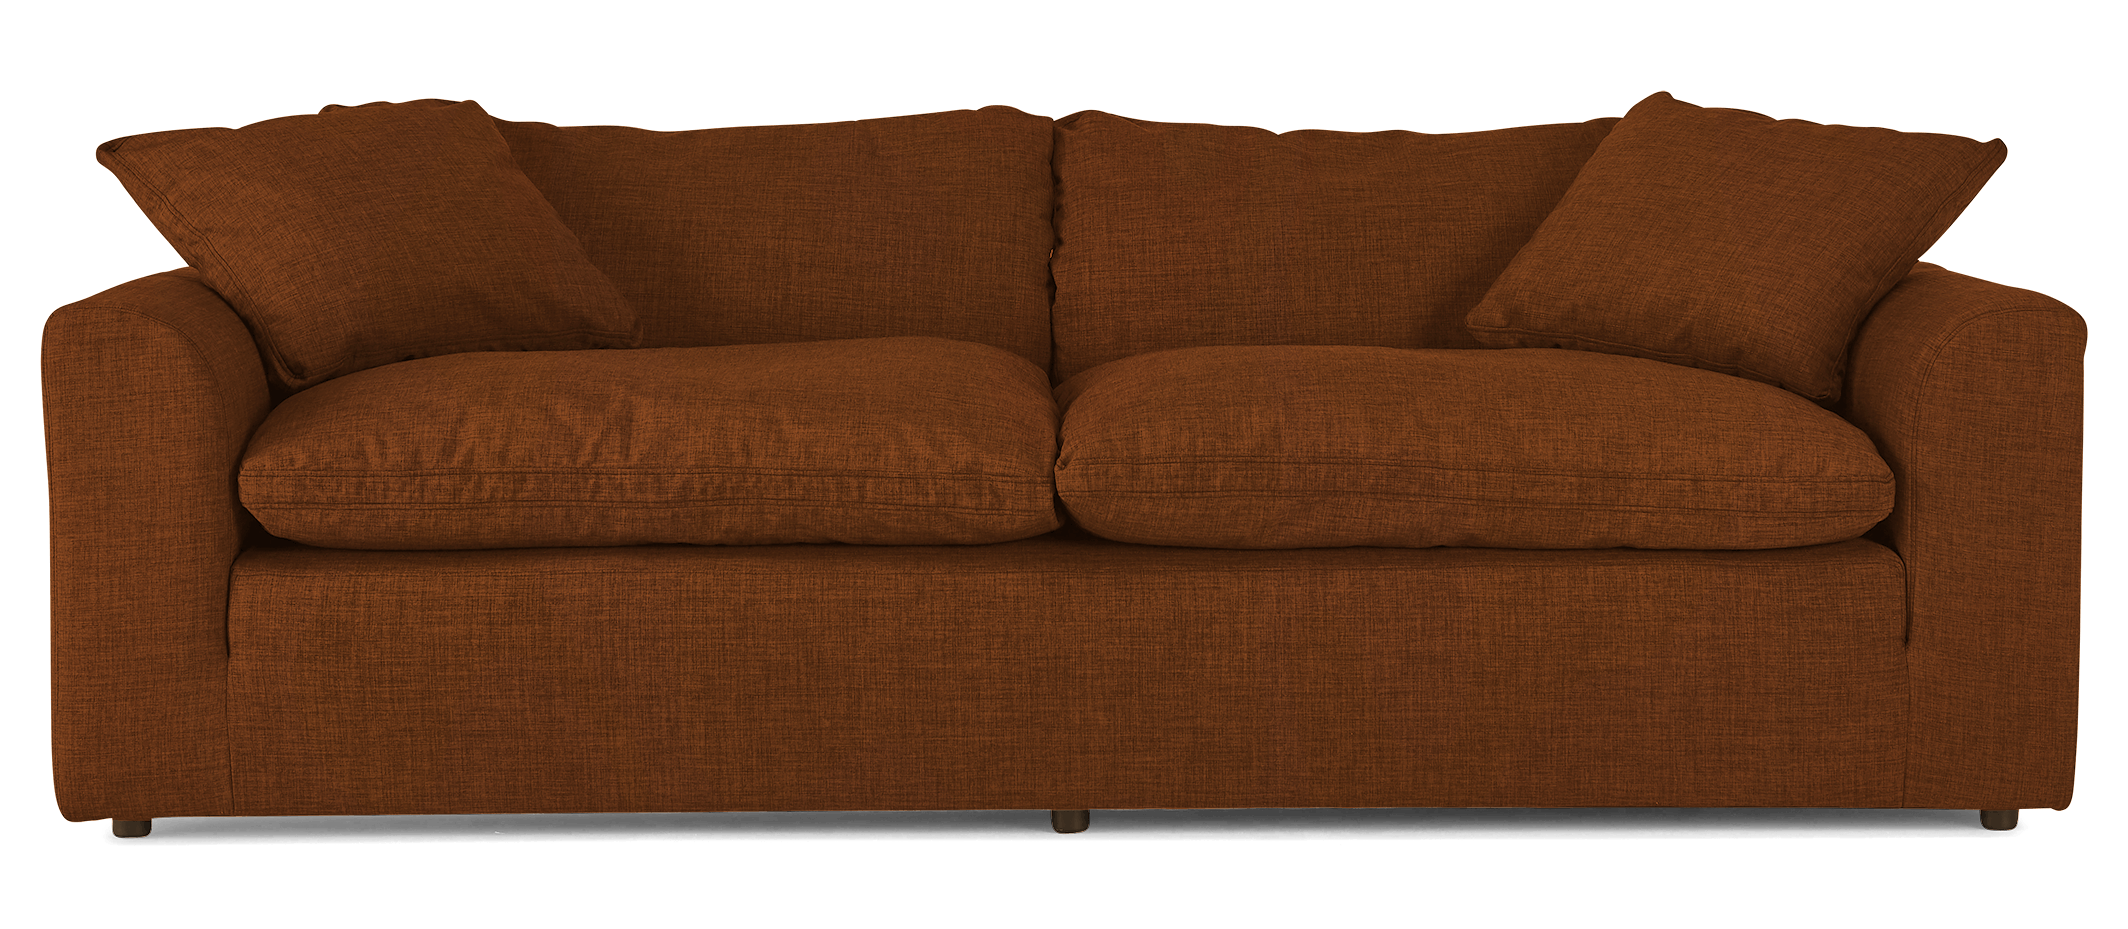 bryant sofa bubbly moscow mule